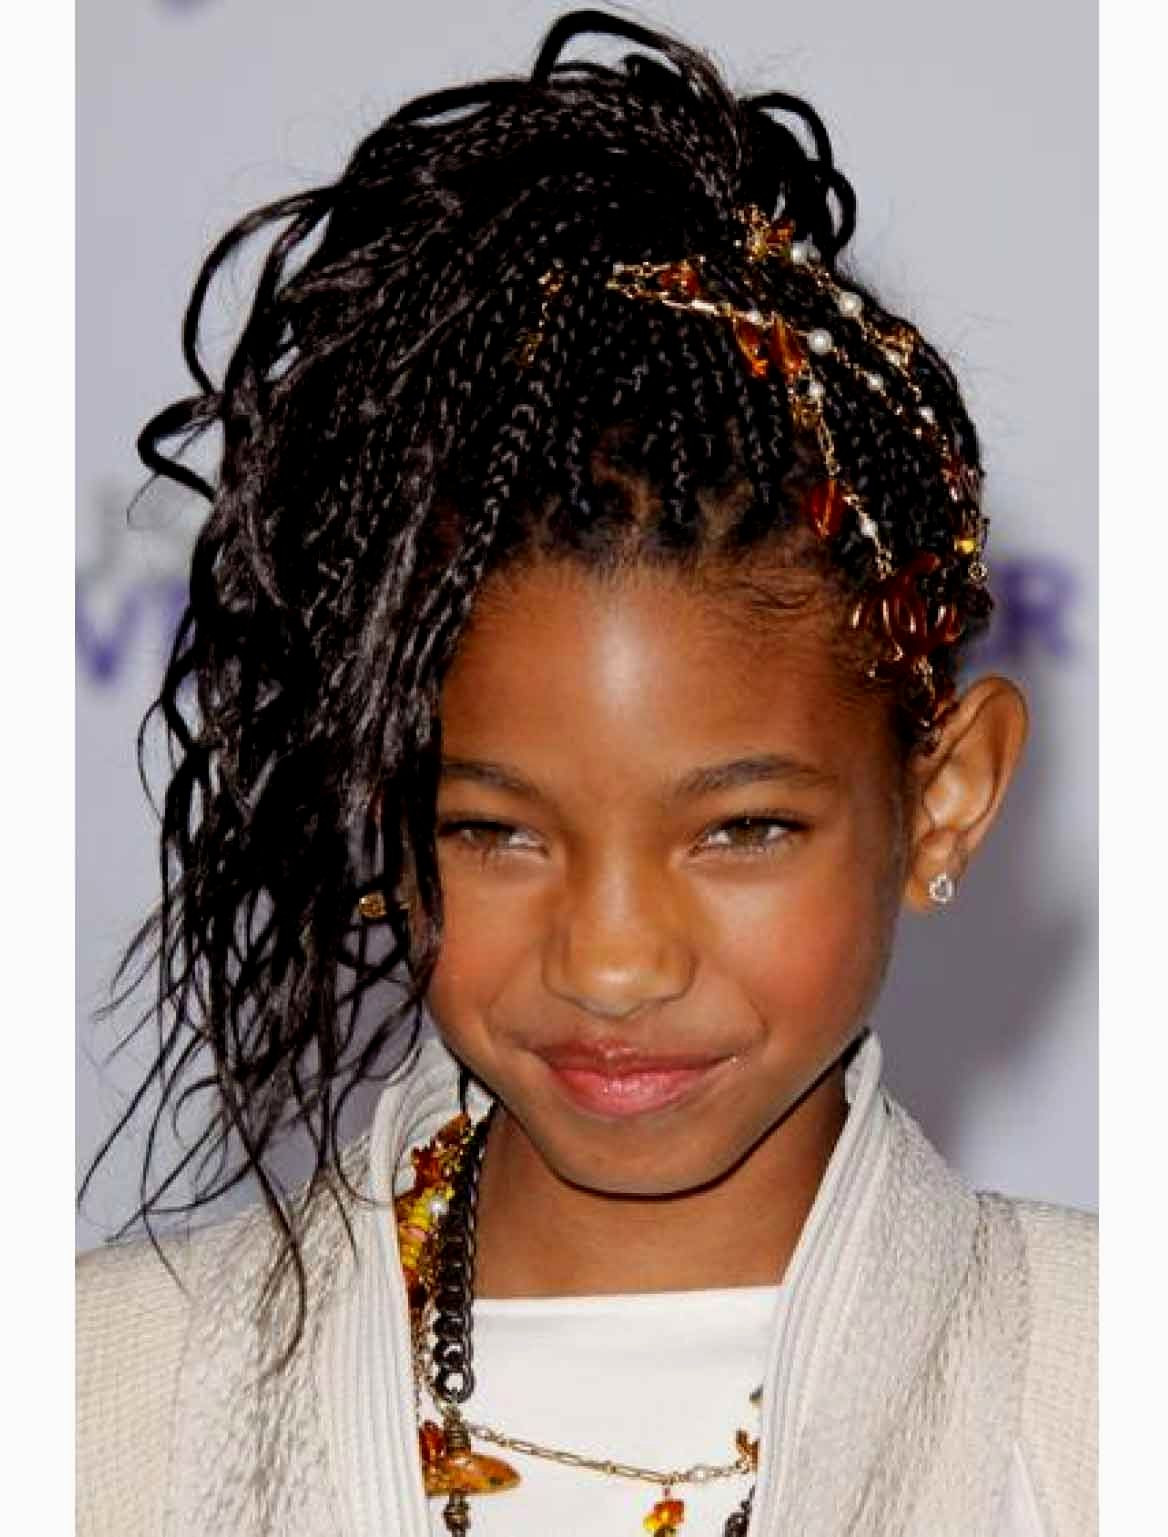 Young Black Girls Hairstyles
 64 Cool Braided Hairstyles for Little Black Girls – HAIRSTYLES